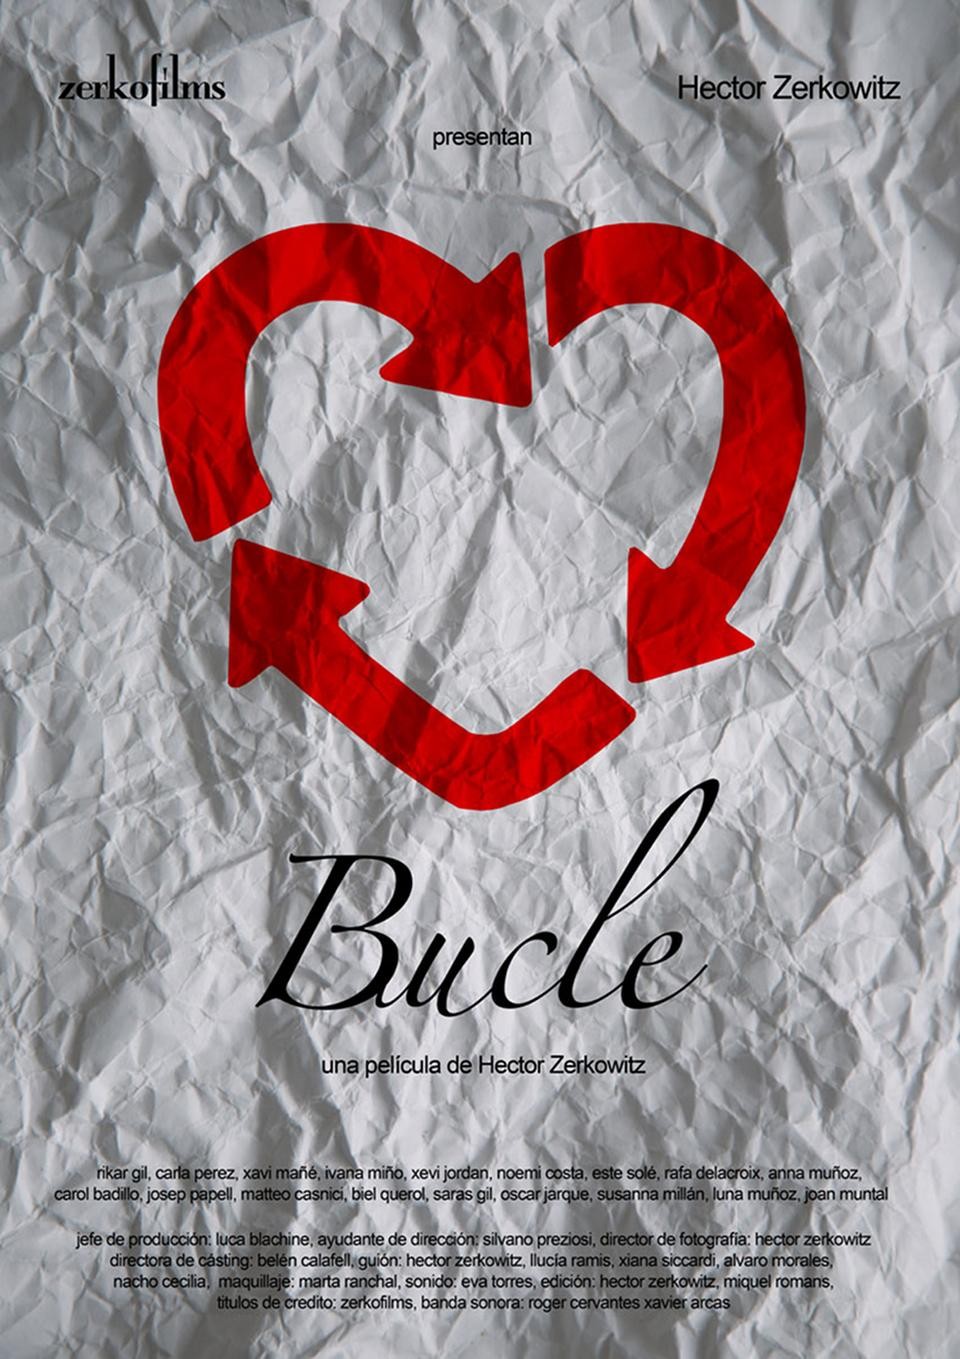 Extra Large Movie Poster Image for Bucle 